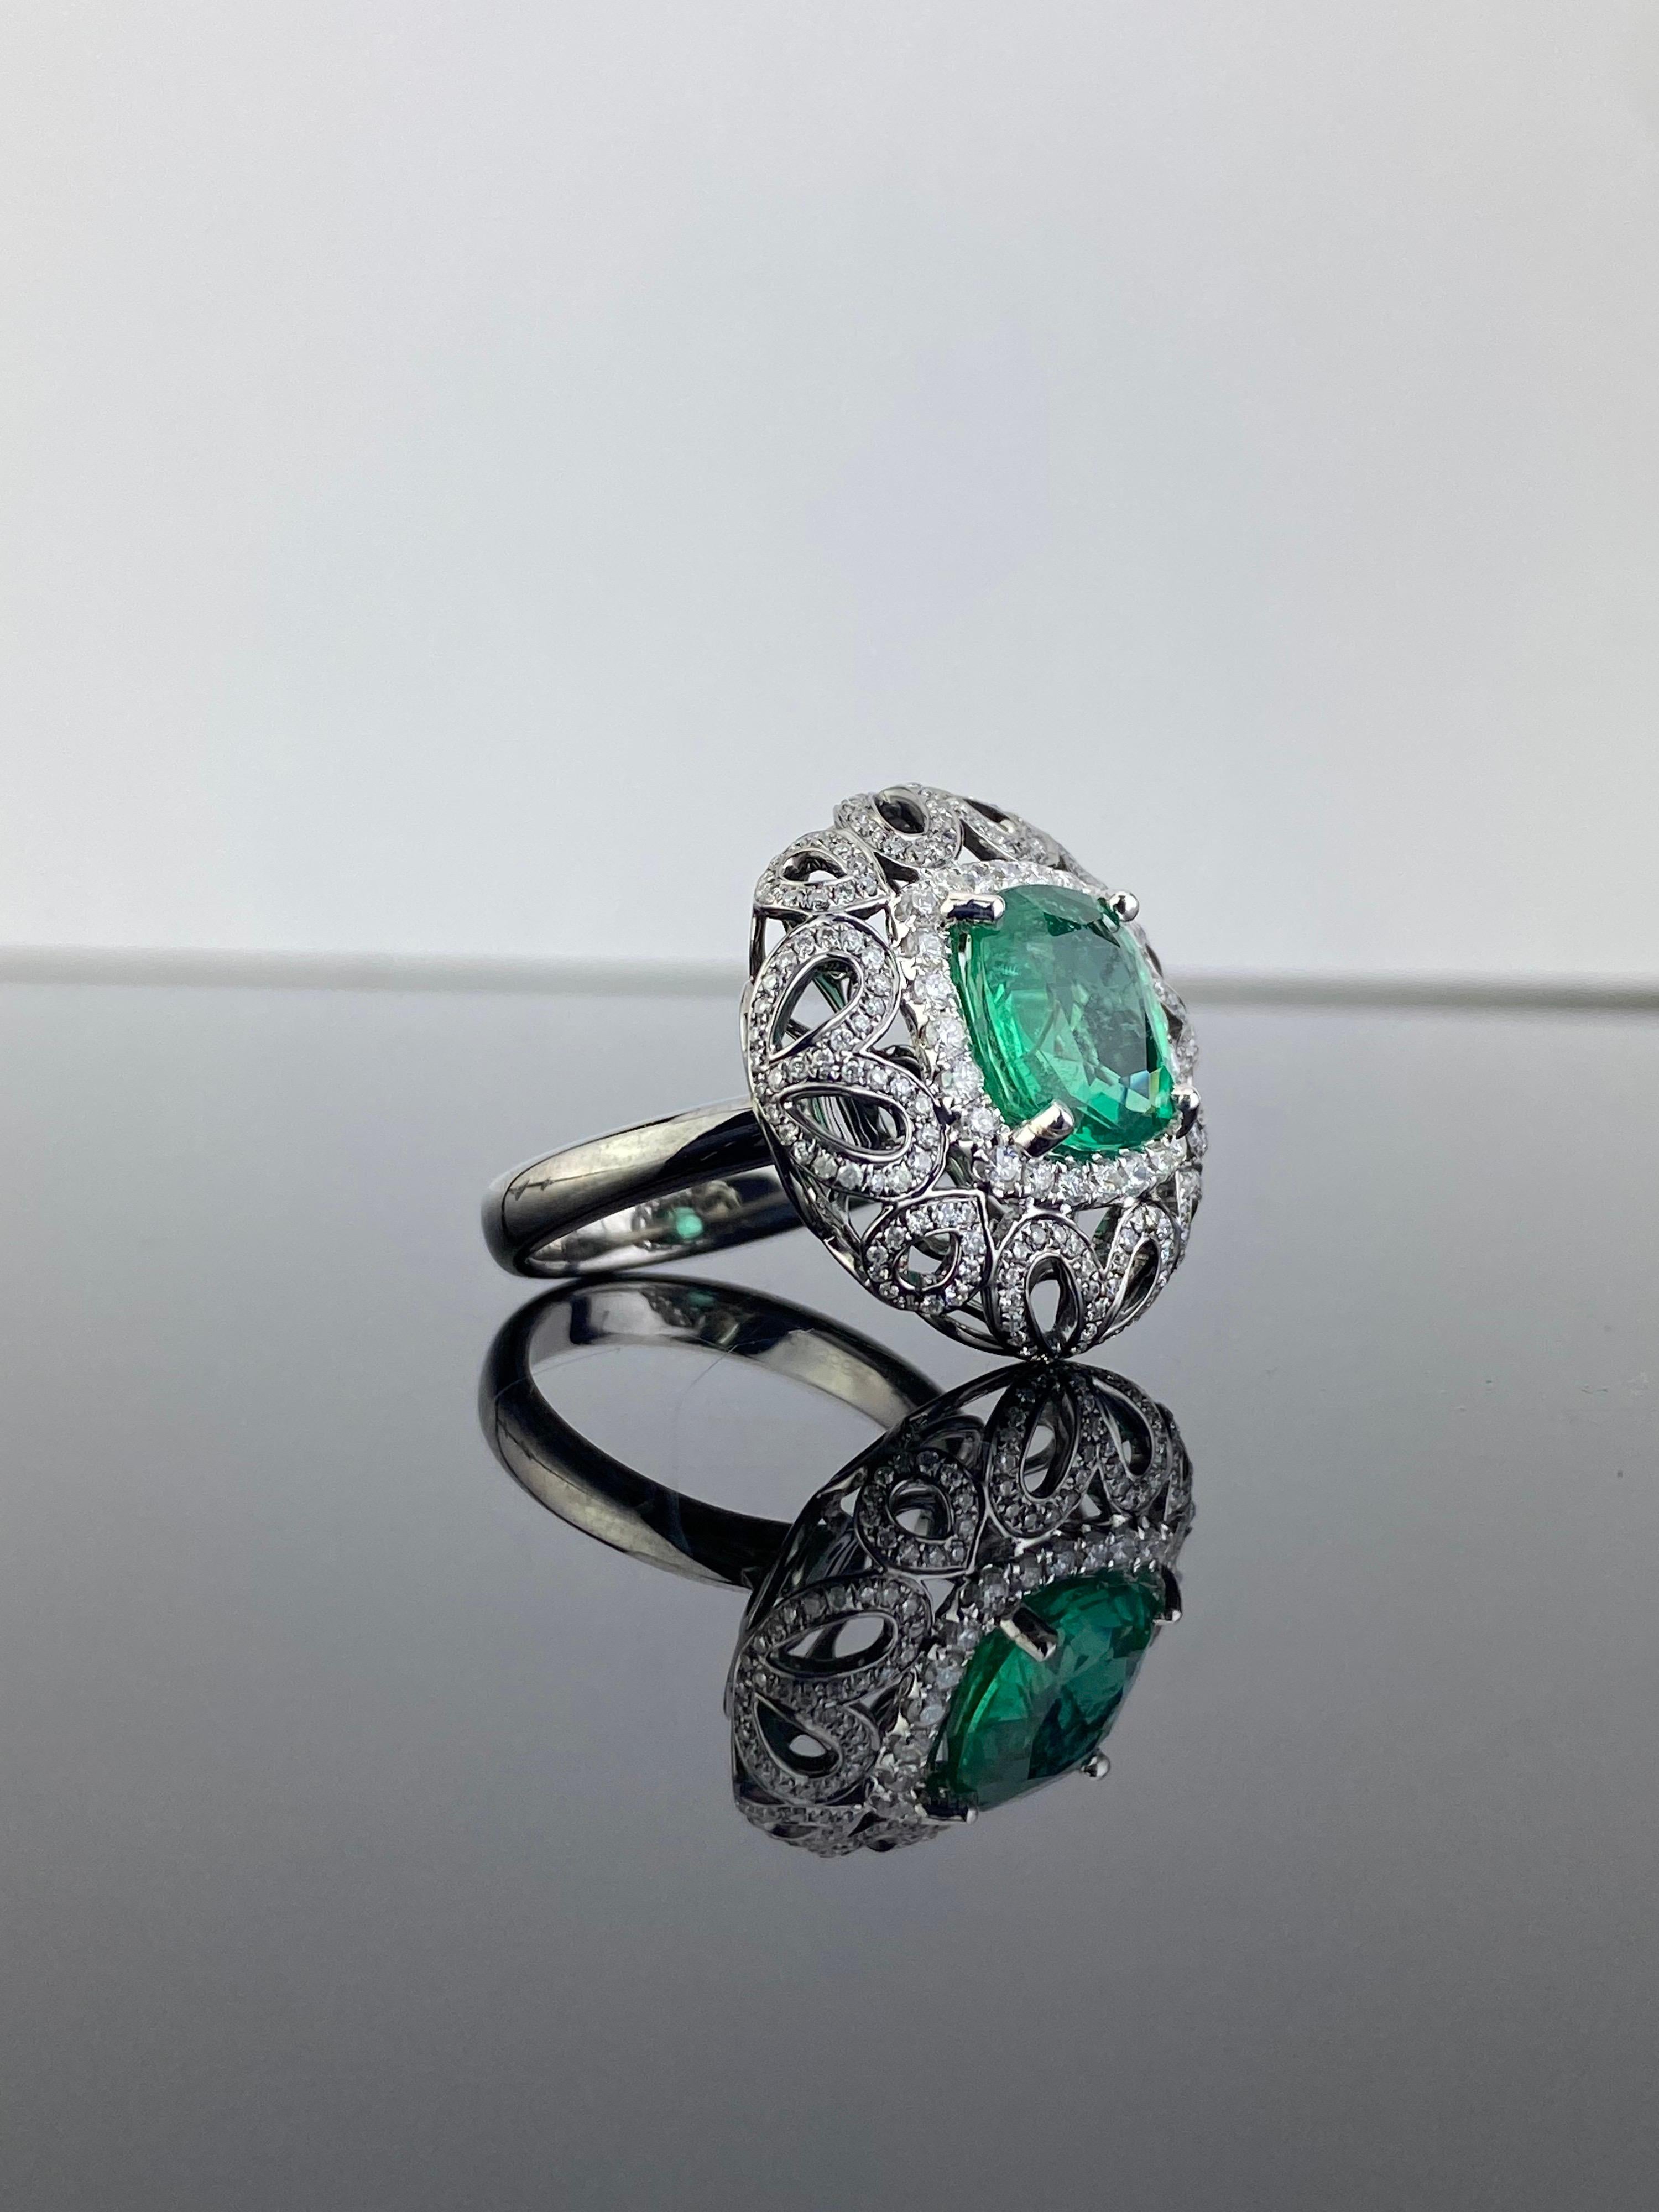 A beautiful 4.97 carat natural Zambian Emerald Cocktail ring, with Brilliant cut Diamond on 18K Gold Band. The Emerald centre stone is completely transparent with a brilliant luster. 
Currently sized at US 7, can be resized.

Center Stone Details: